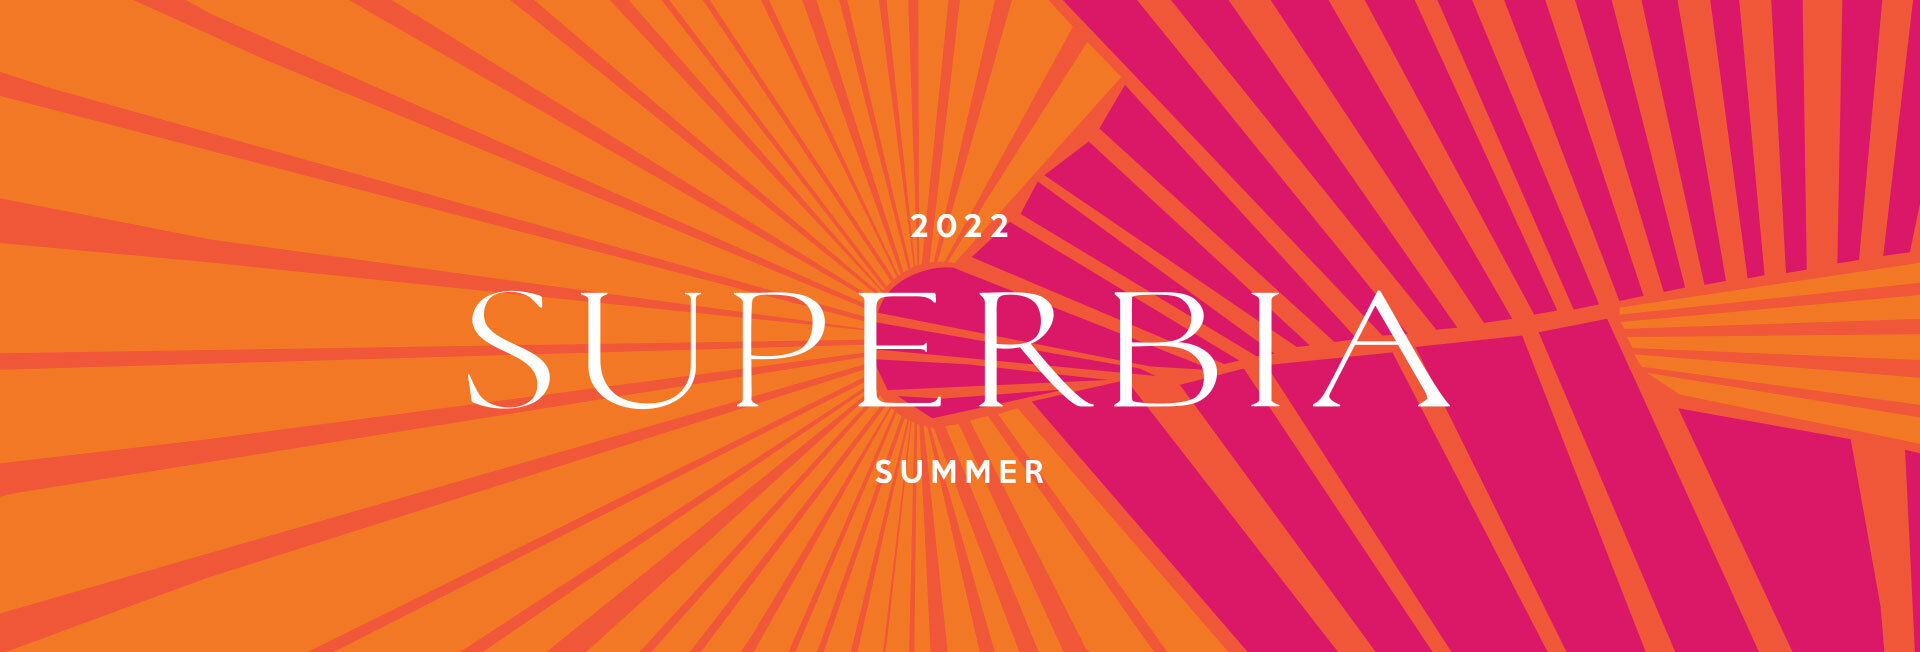 orange and pink palm leaves with text superbia summer 2022